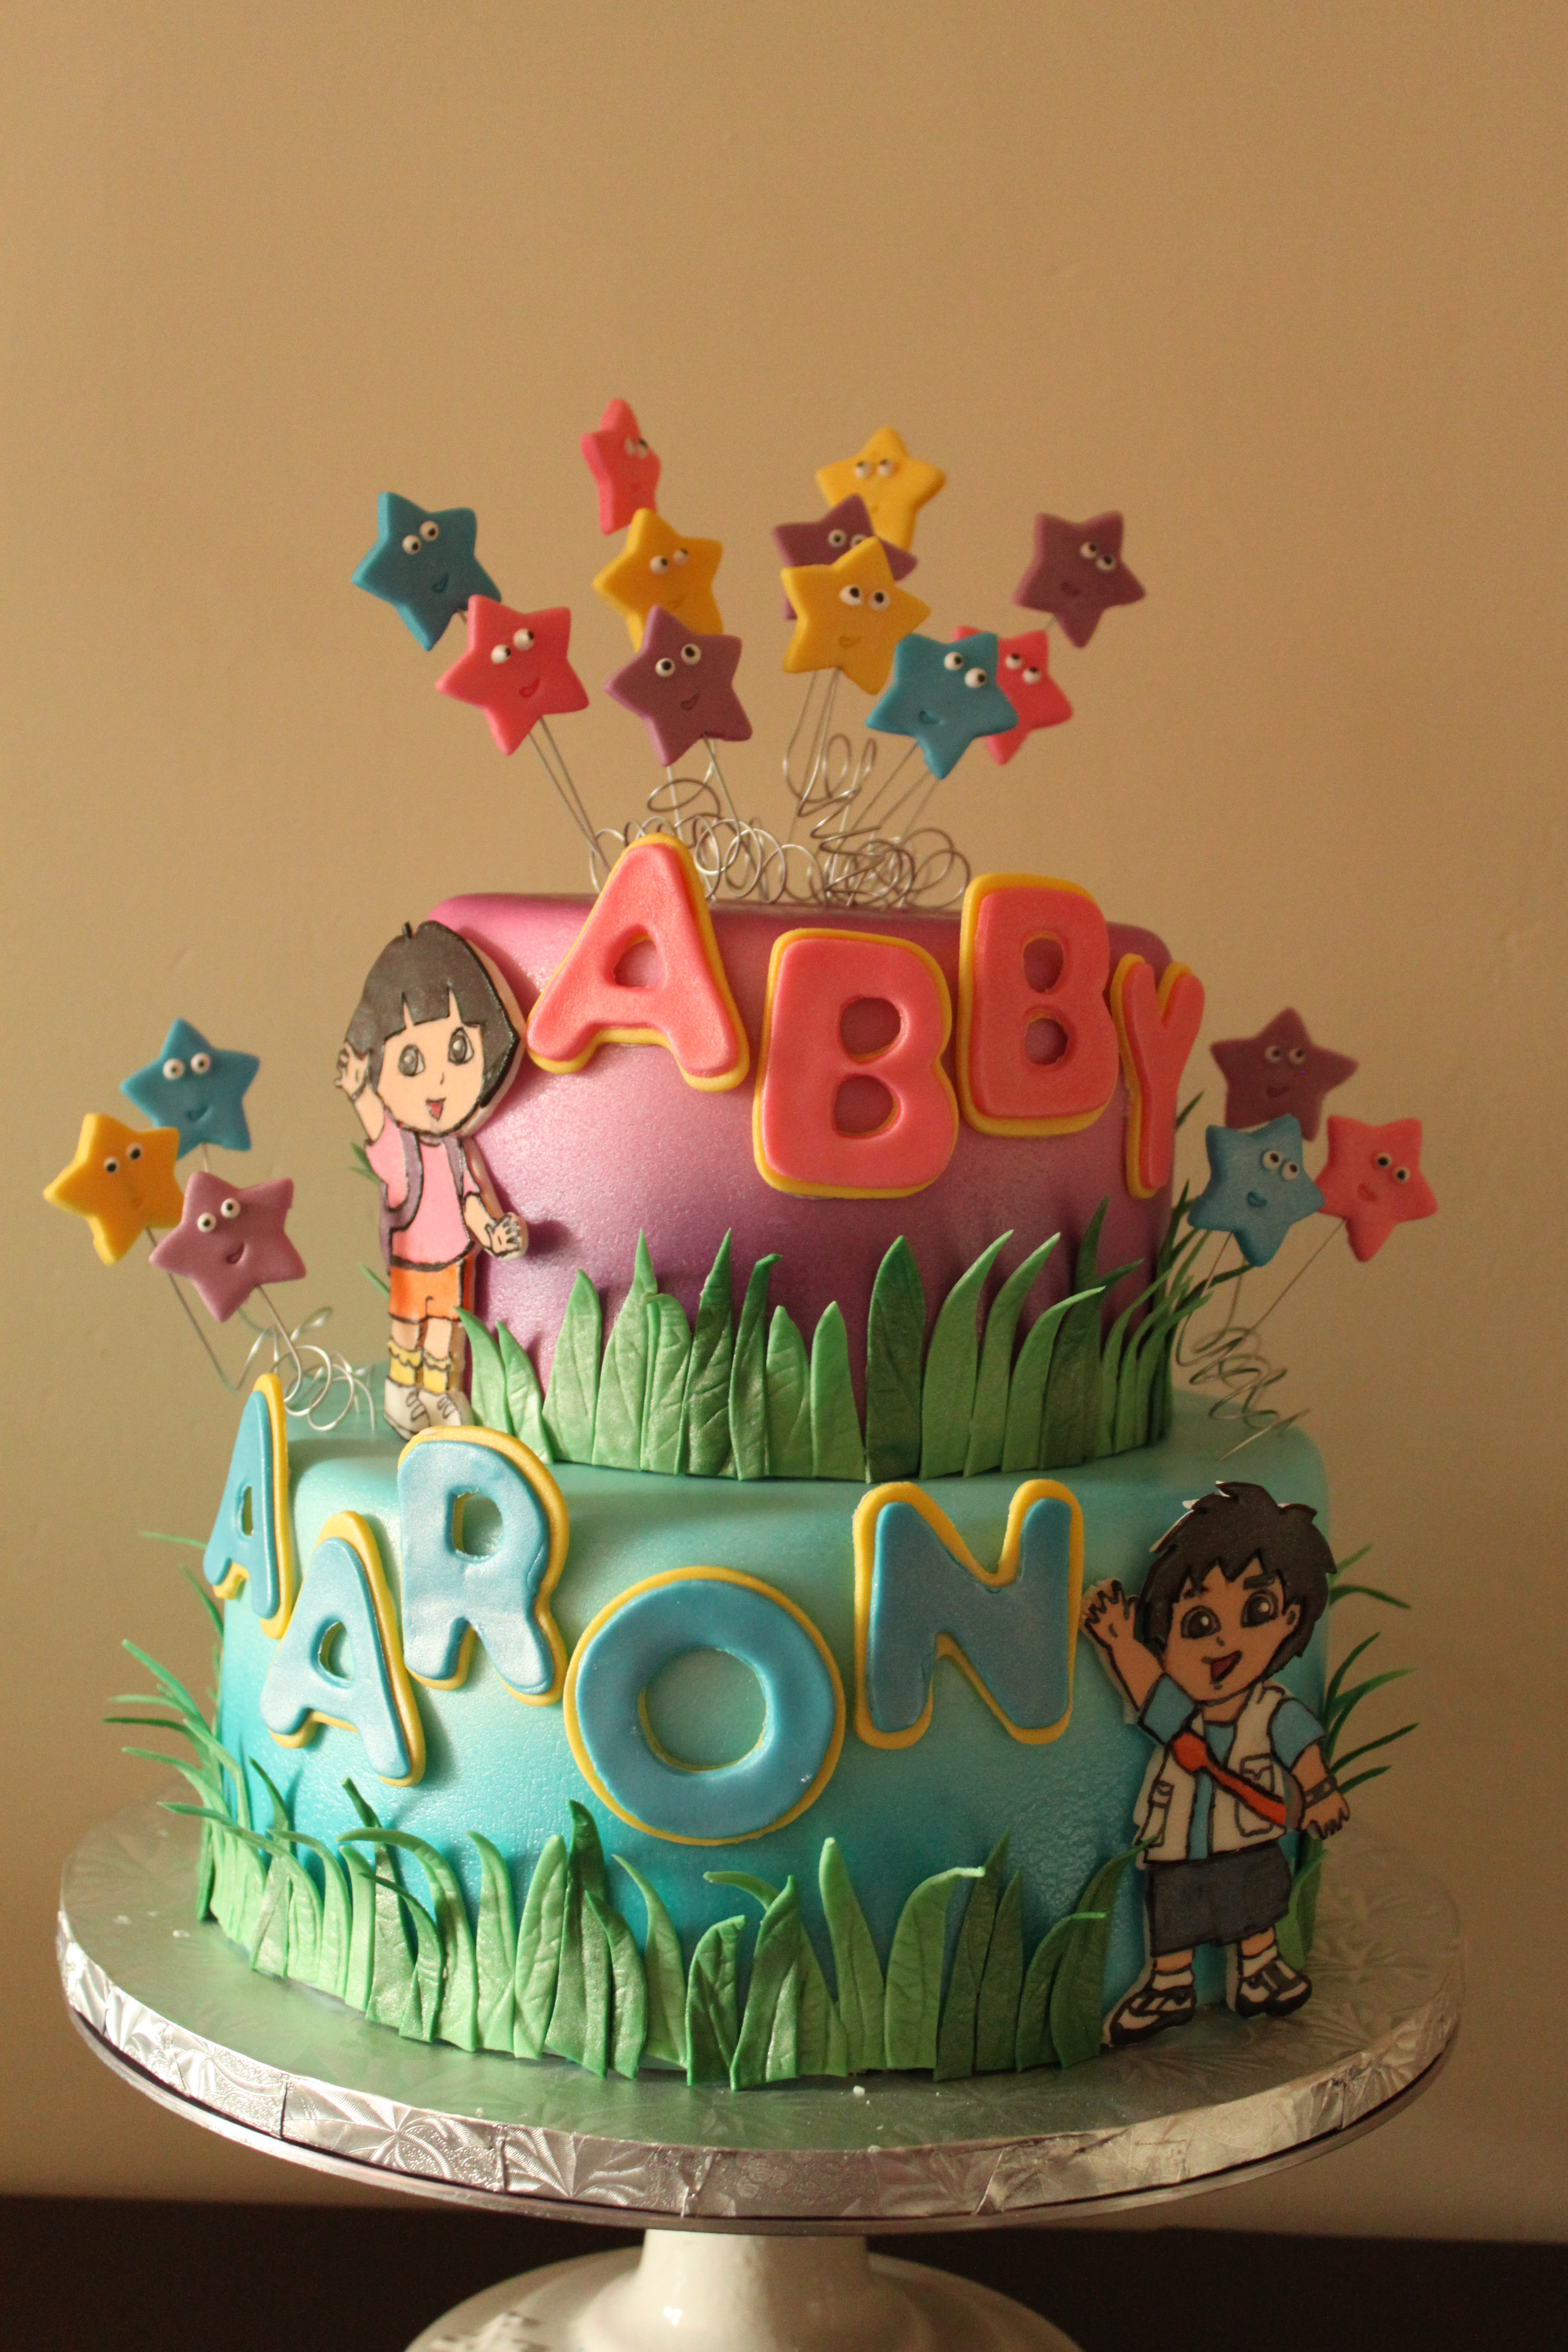 Cake Toppers Dora the Explorer and Friends Birthday Cake Topper India | Ubuy